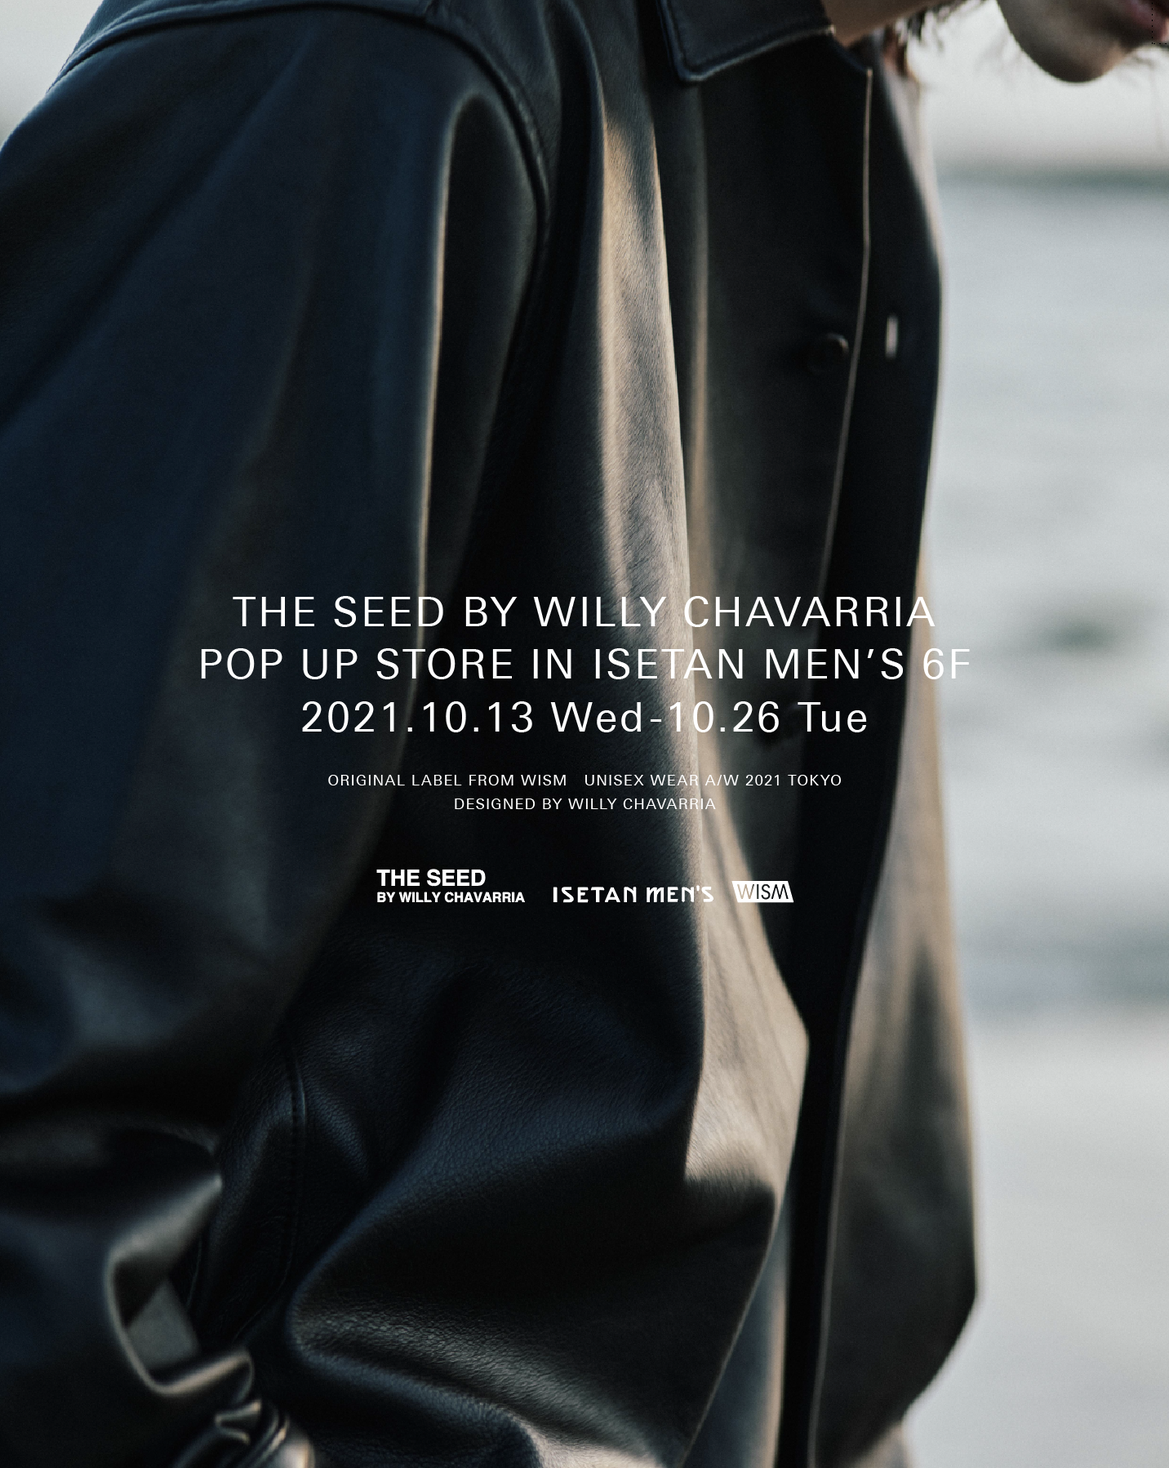 WISM オリジナルレーベル『THE SEED BY WILLY CHAVARRIA 